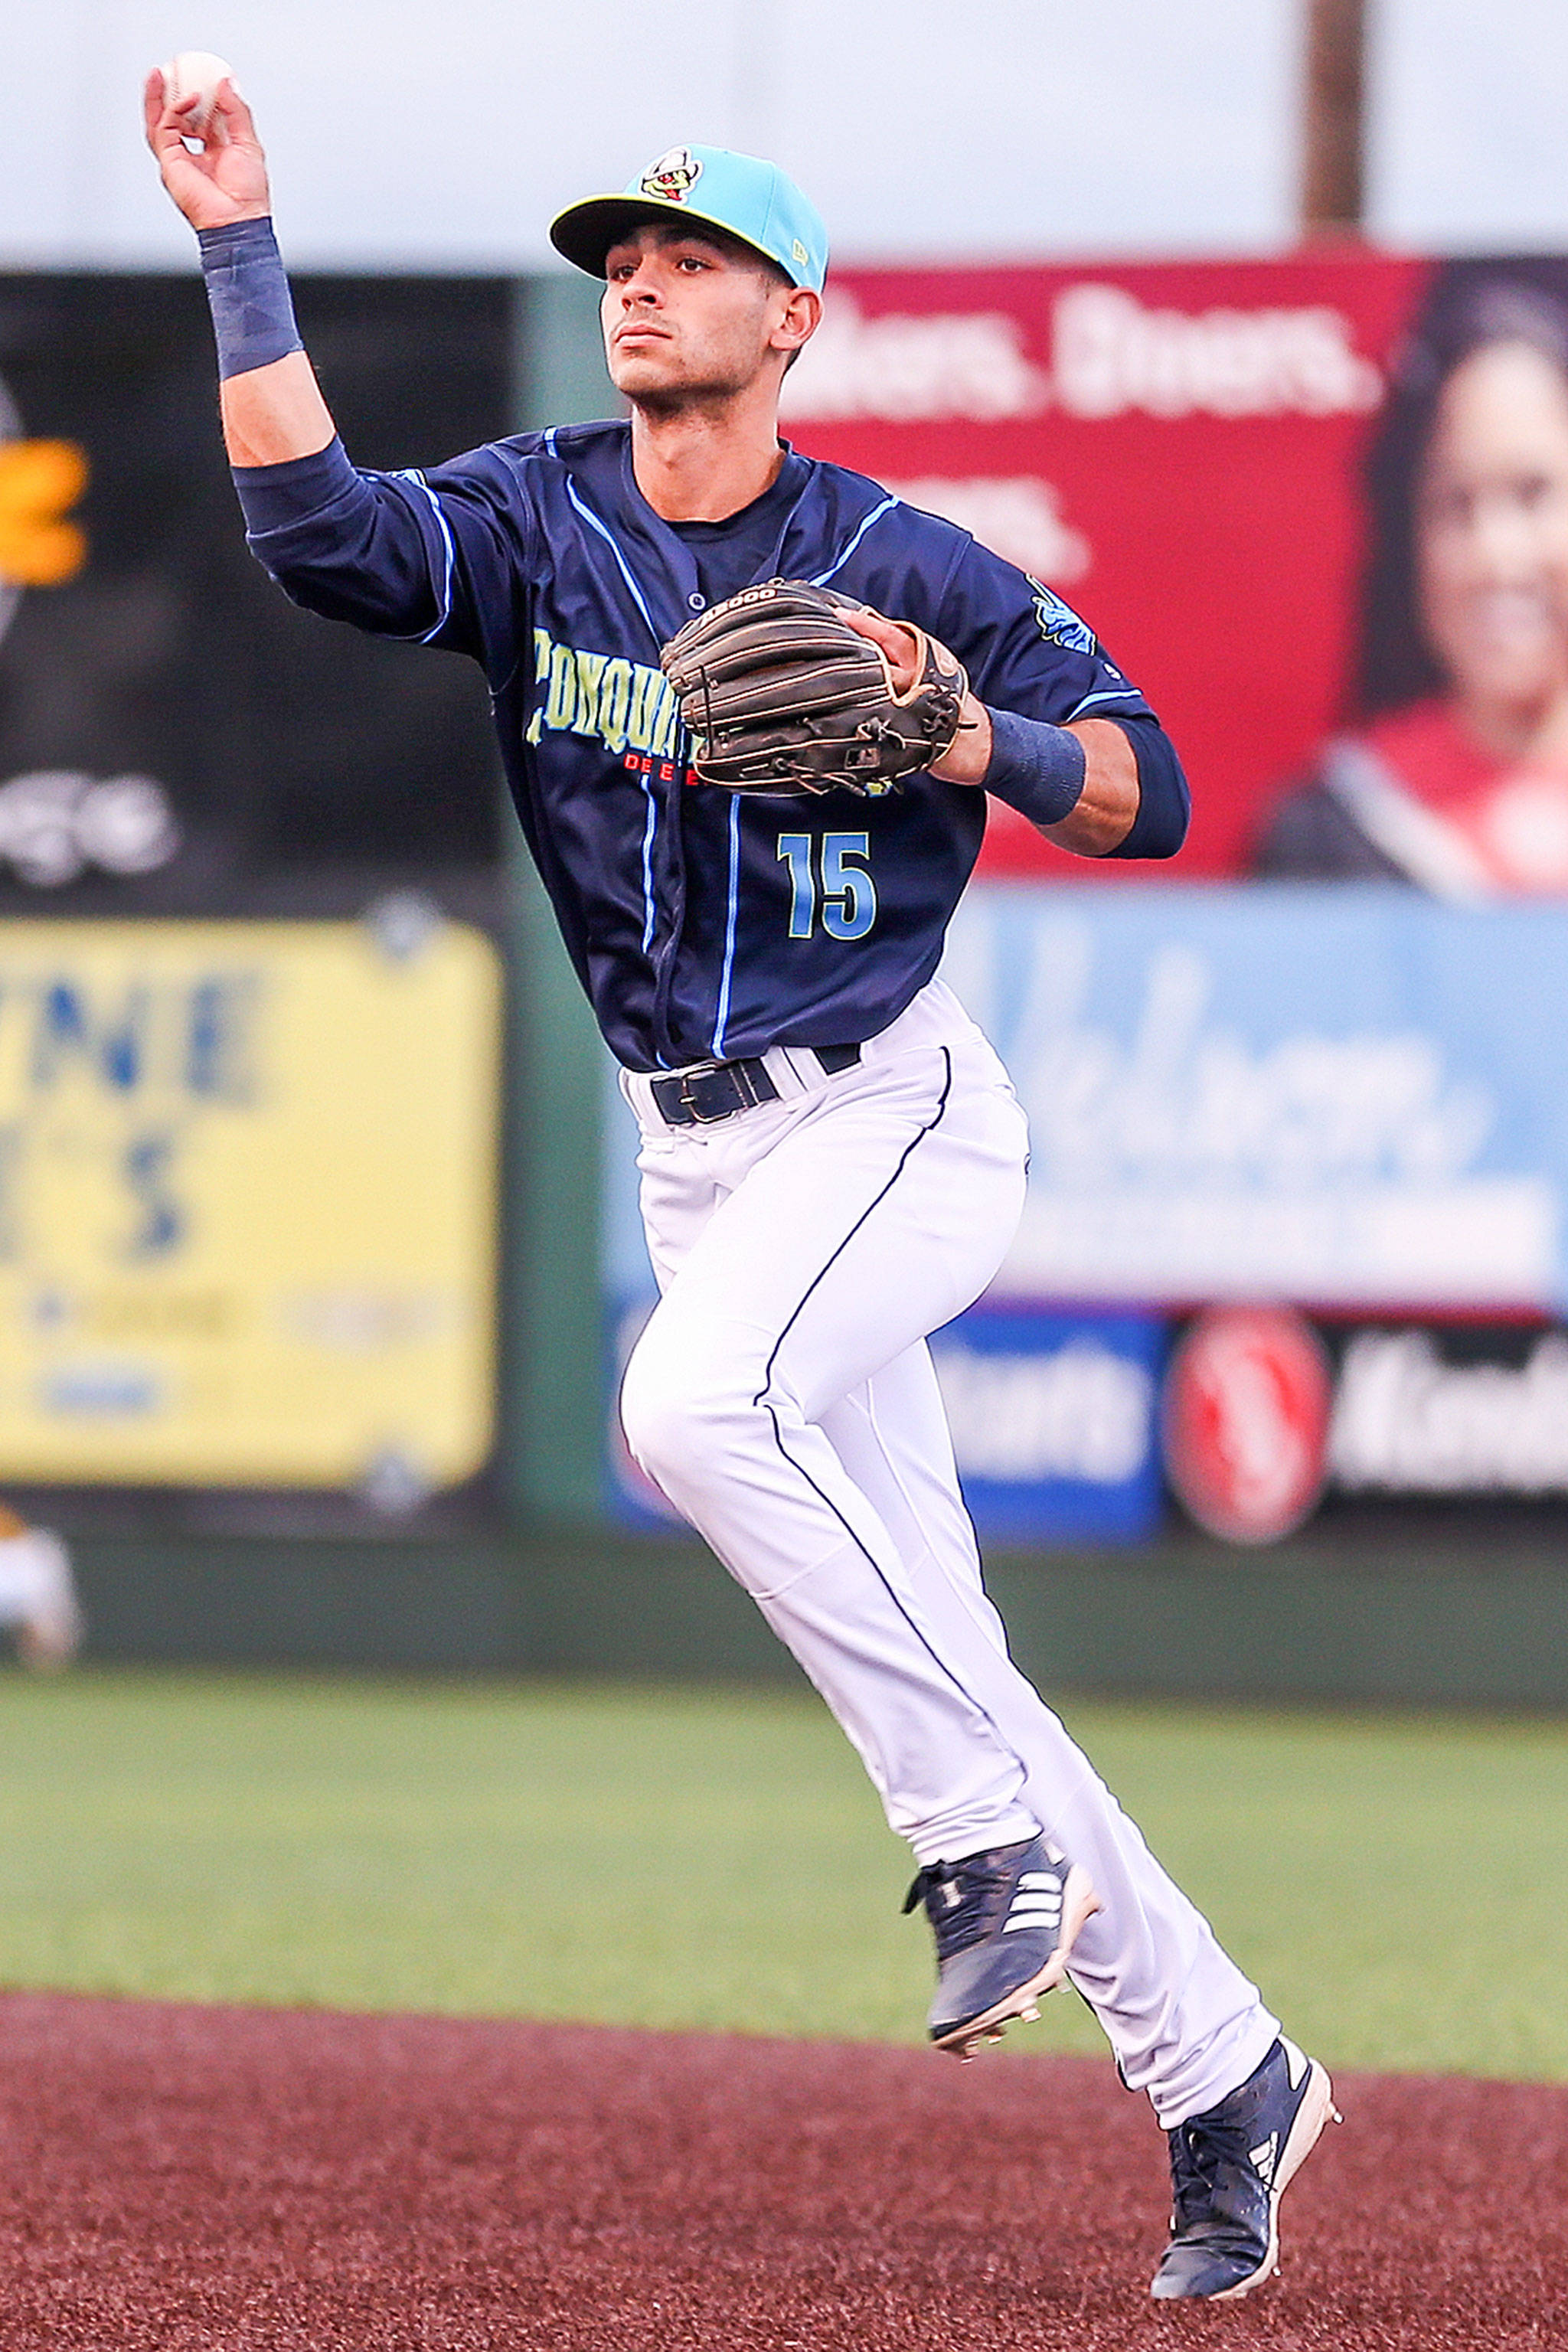 The AquaSox’s Patrick Frick gathers a ground ball at third base during a game against the Canadians on July 12, 2019, at Funko Field in Everett. (Kevin Clark / The Herald)